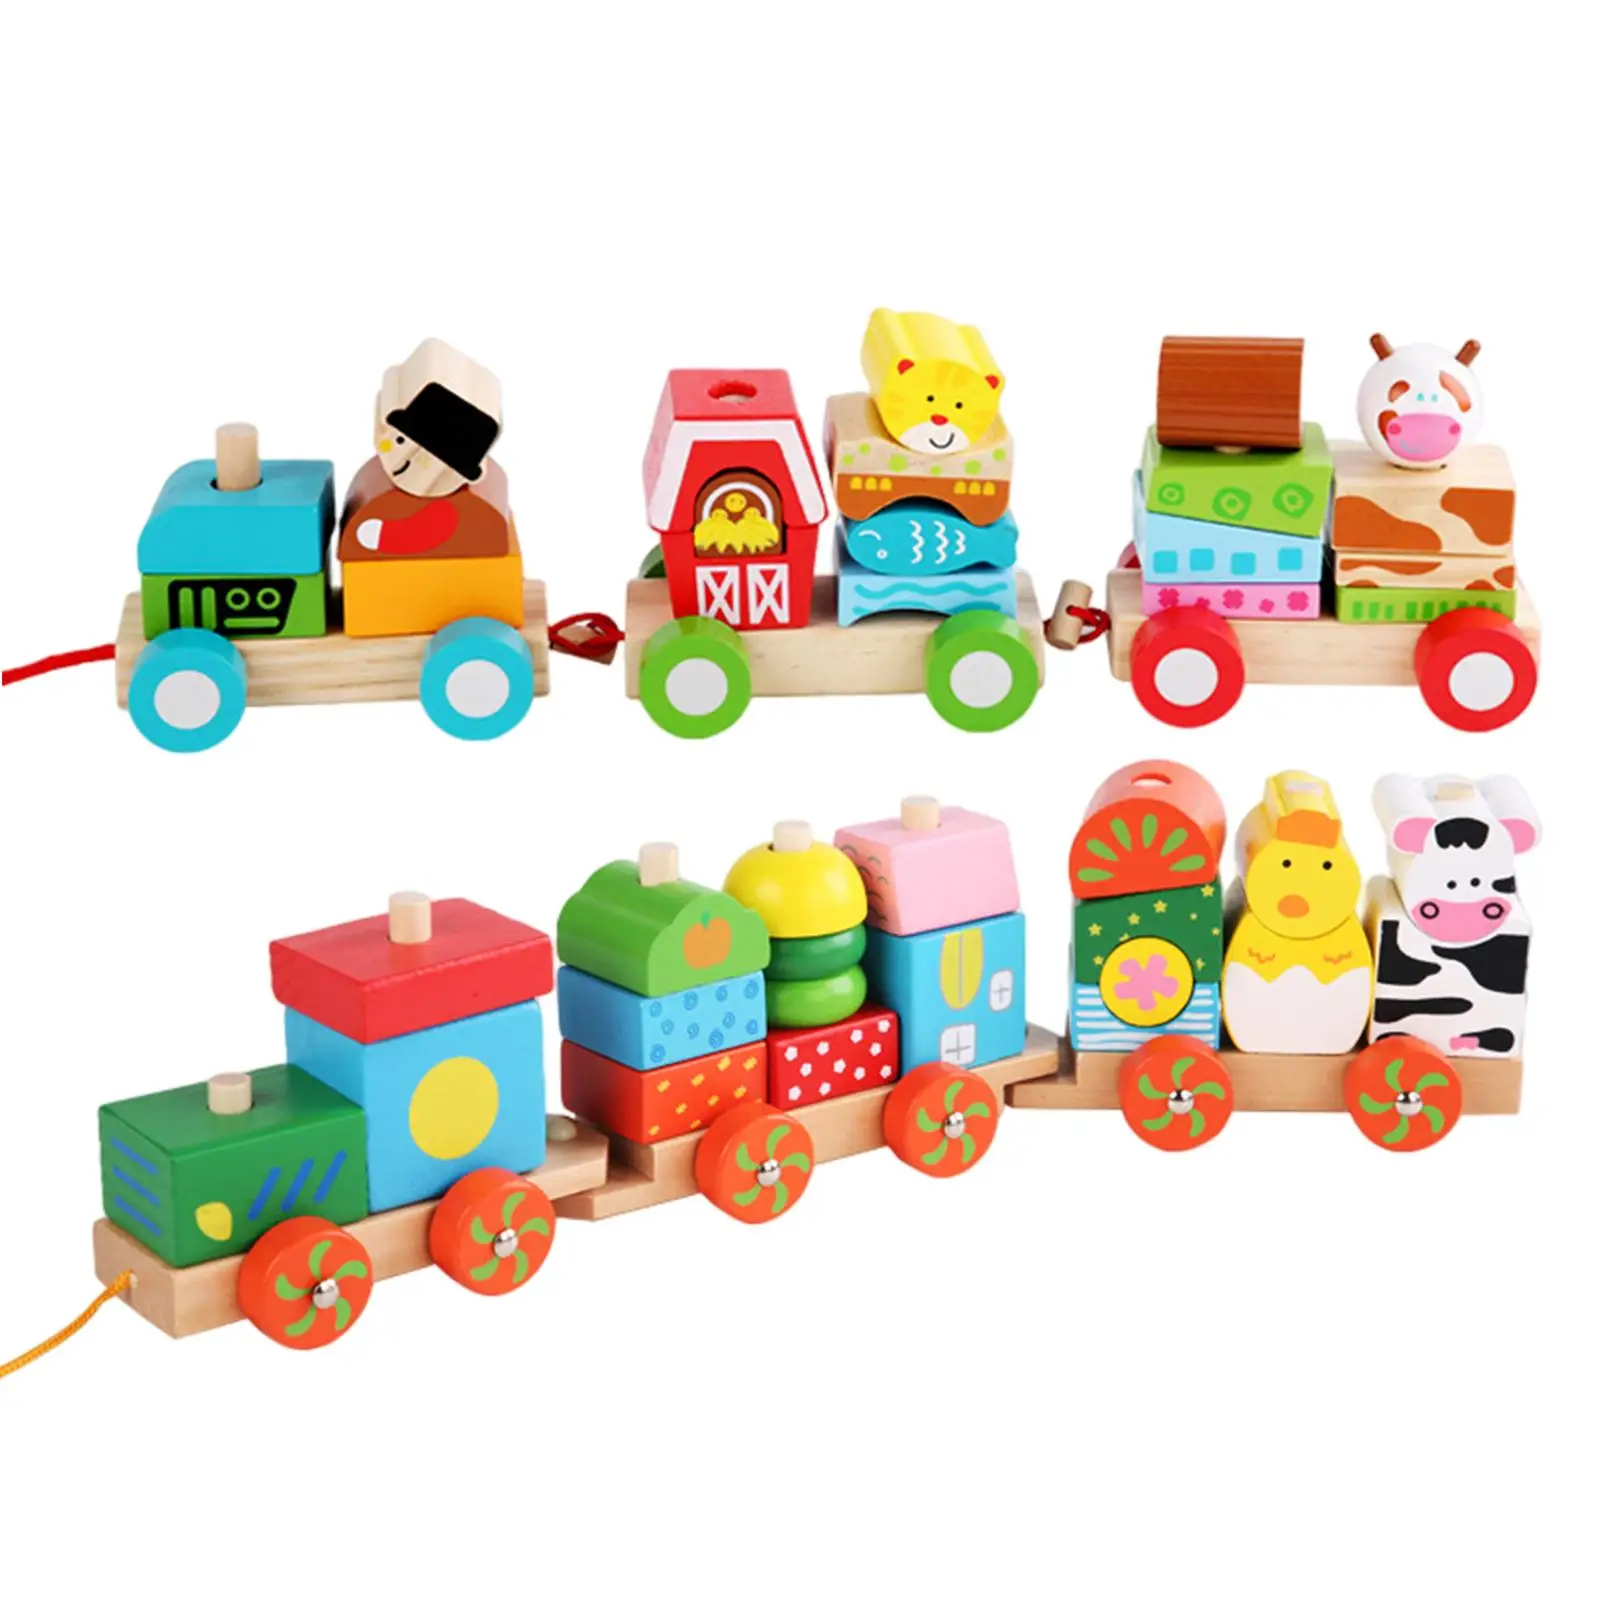 Stacking Train Toy, Wooden Small Trains, Fun Smooth Wooden Train Set, Classic Wooden Toddler Toy, for Christmas Birthday